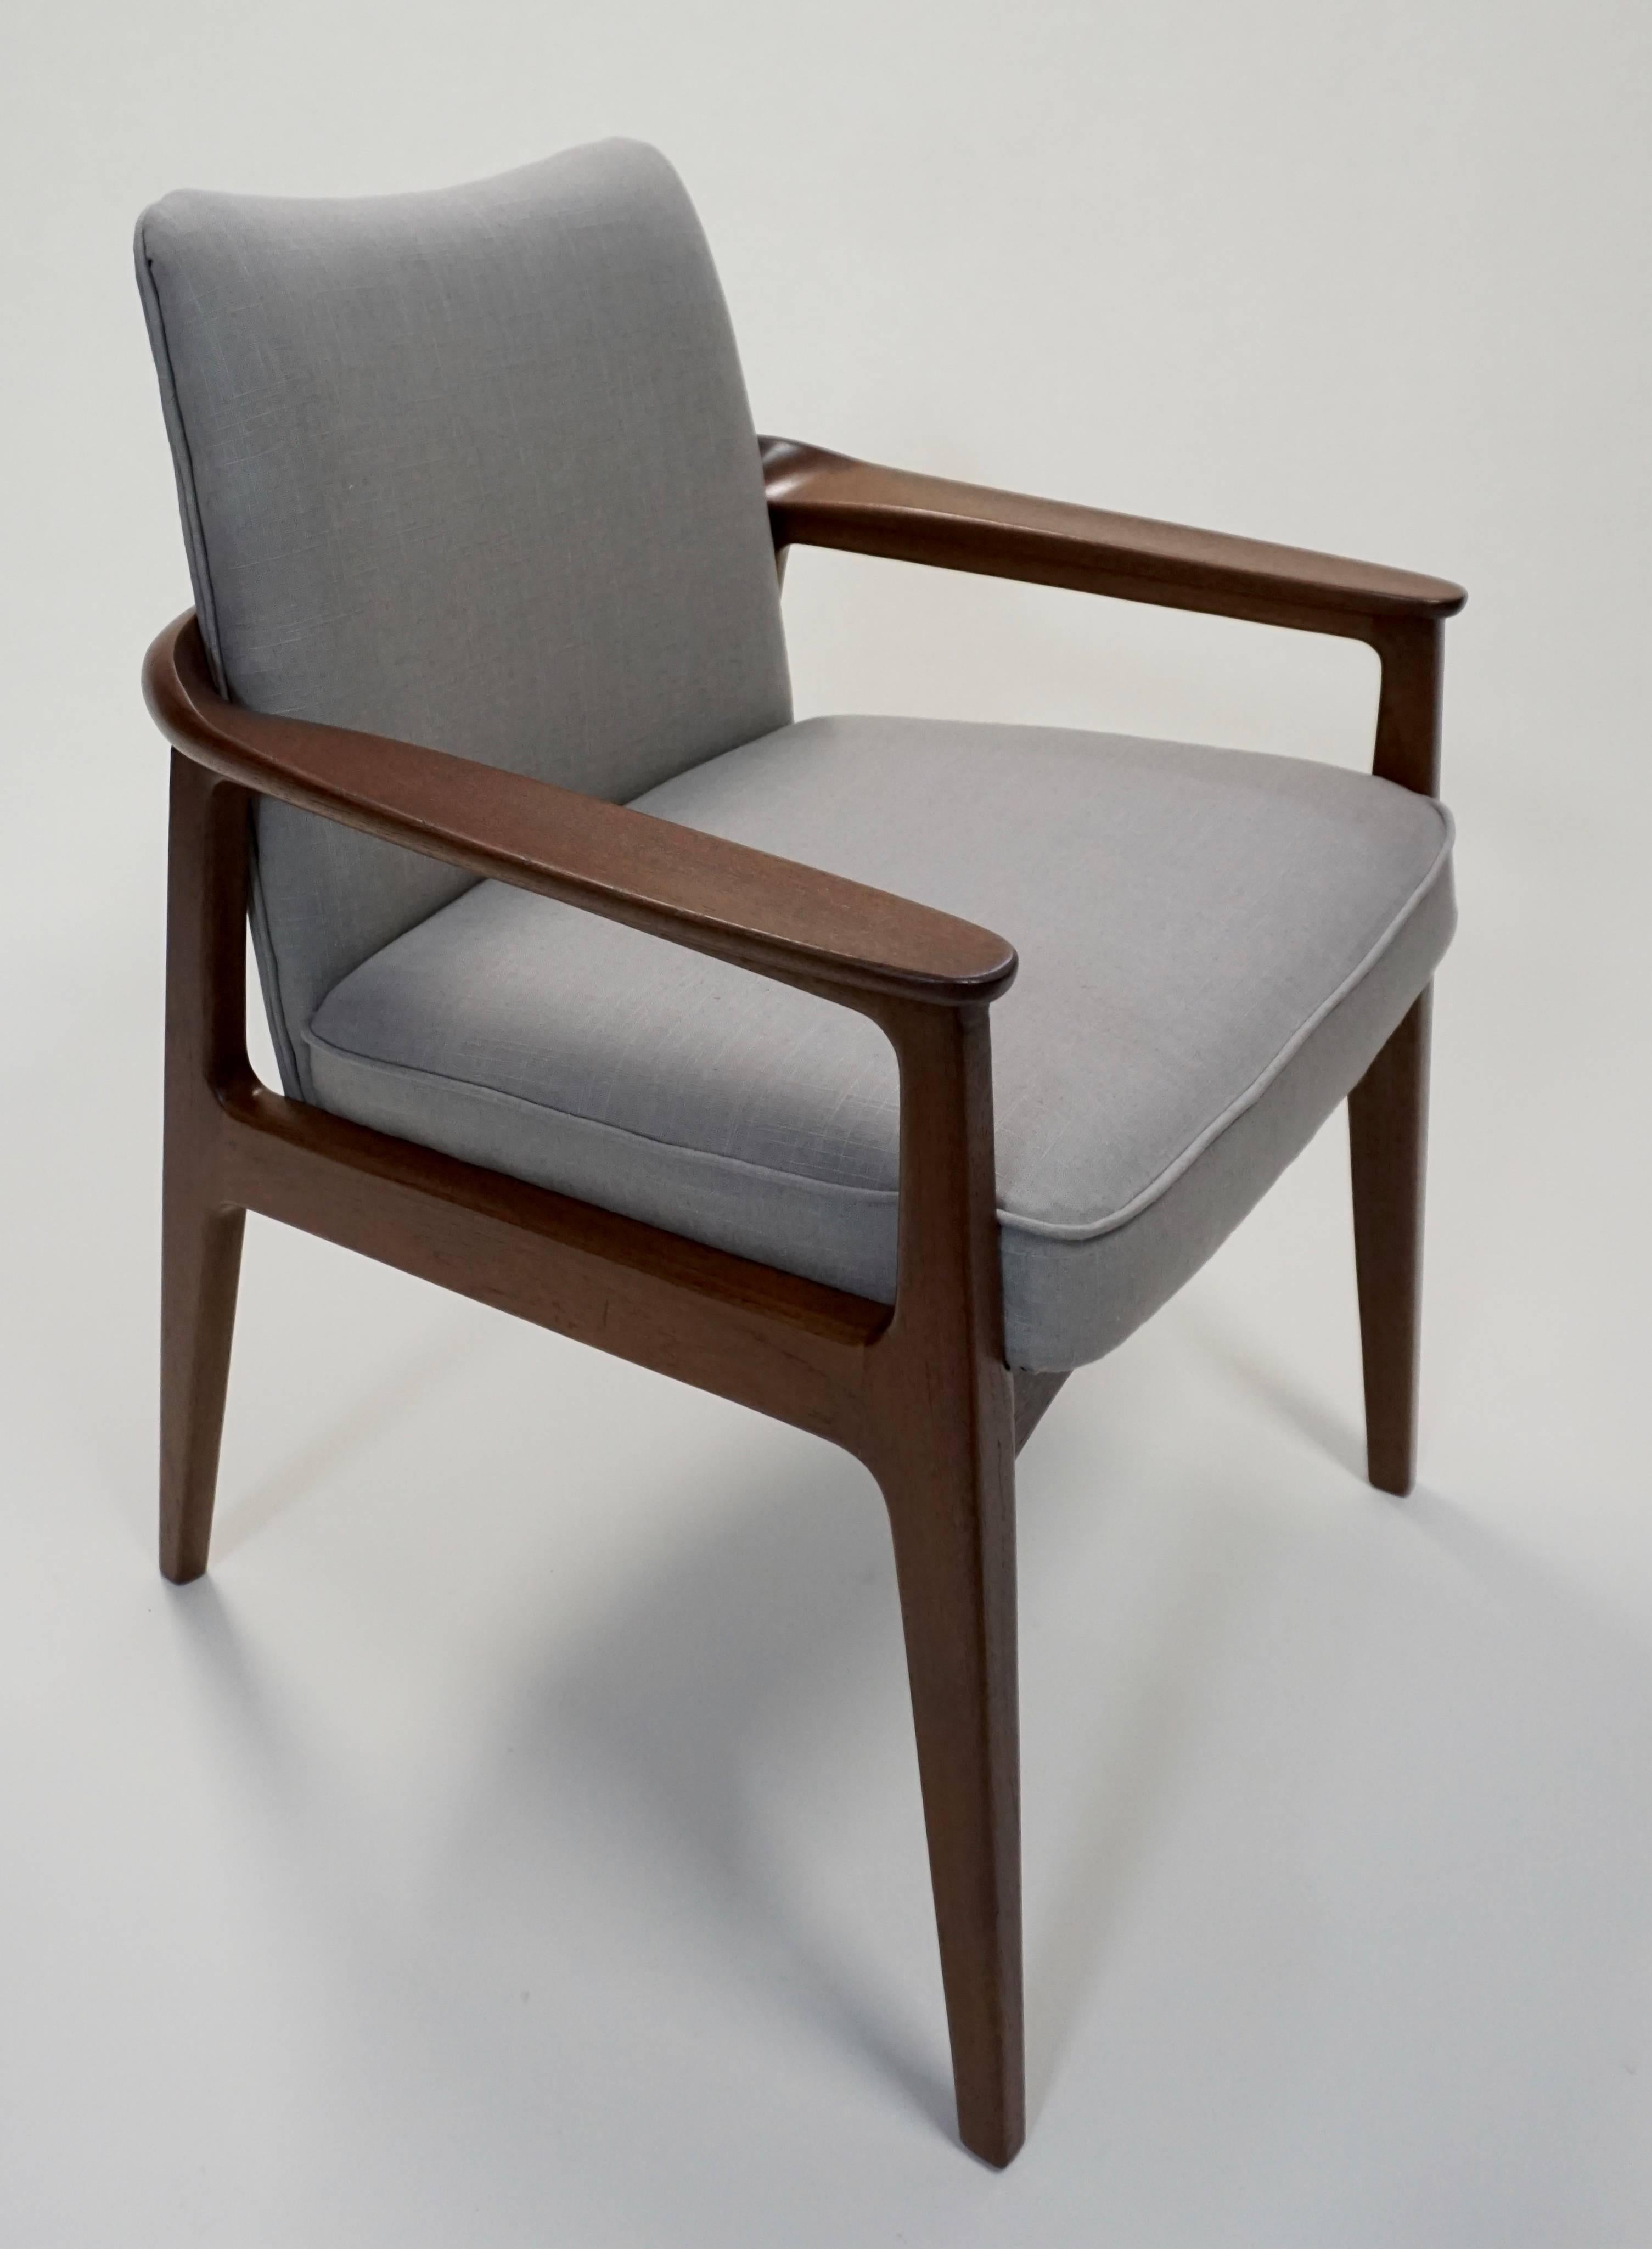 Restored. Teakwood construction. All new upholstery in Belgian linen (Ash), by Greenhouse Fabrics. 3 labels.